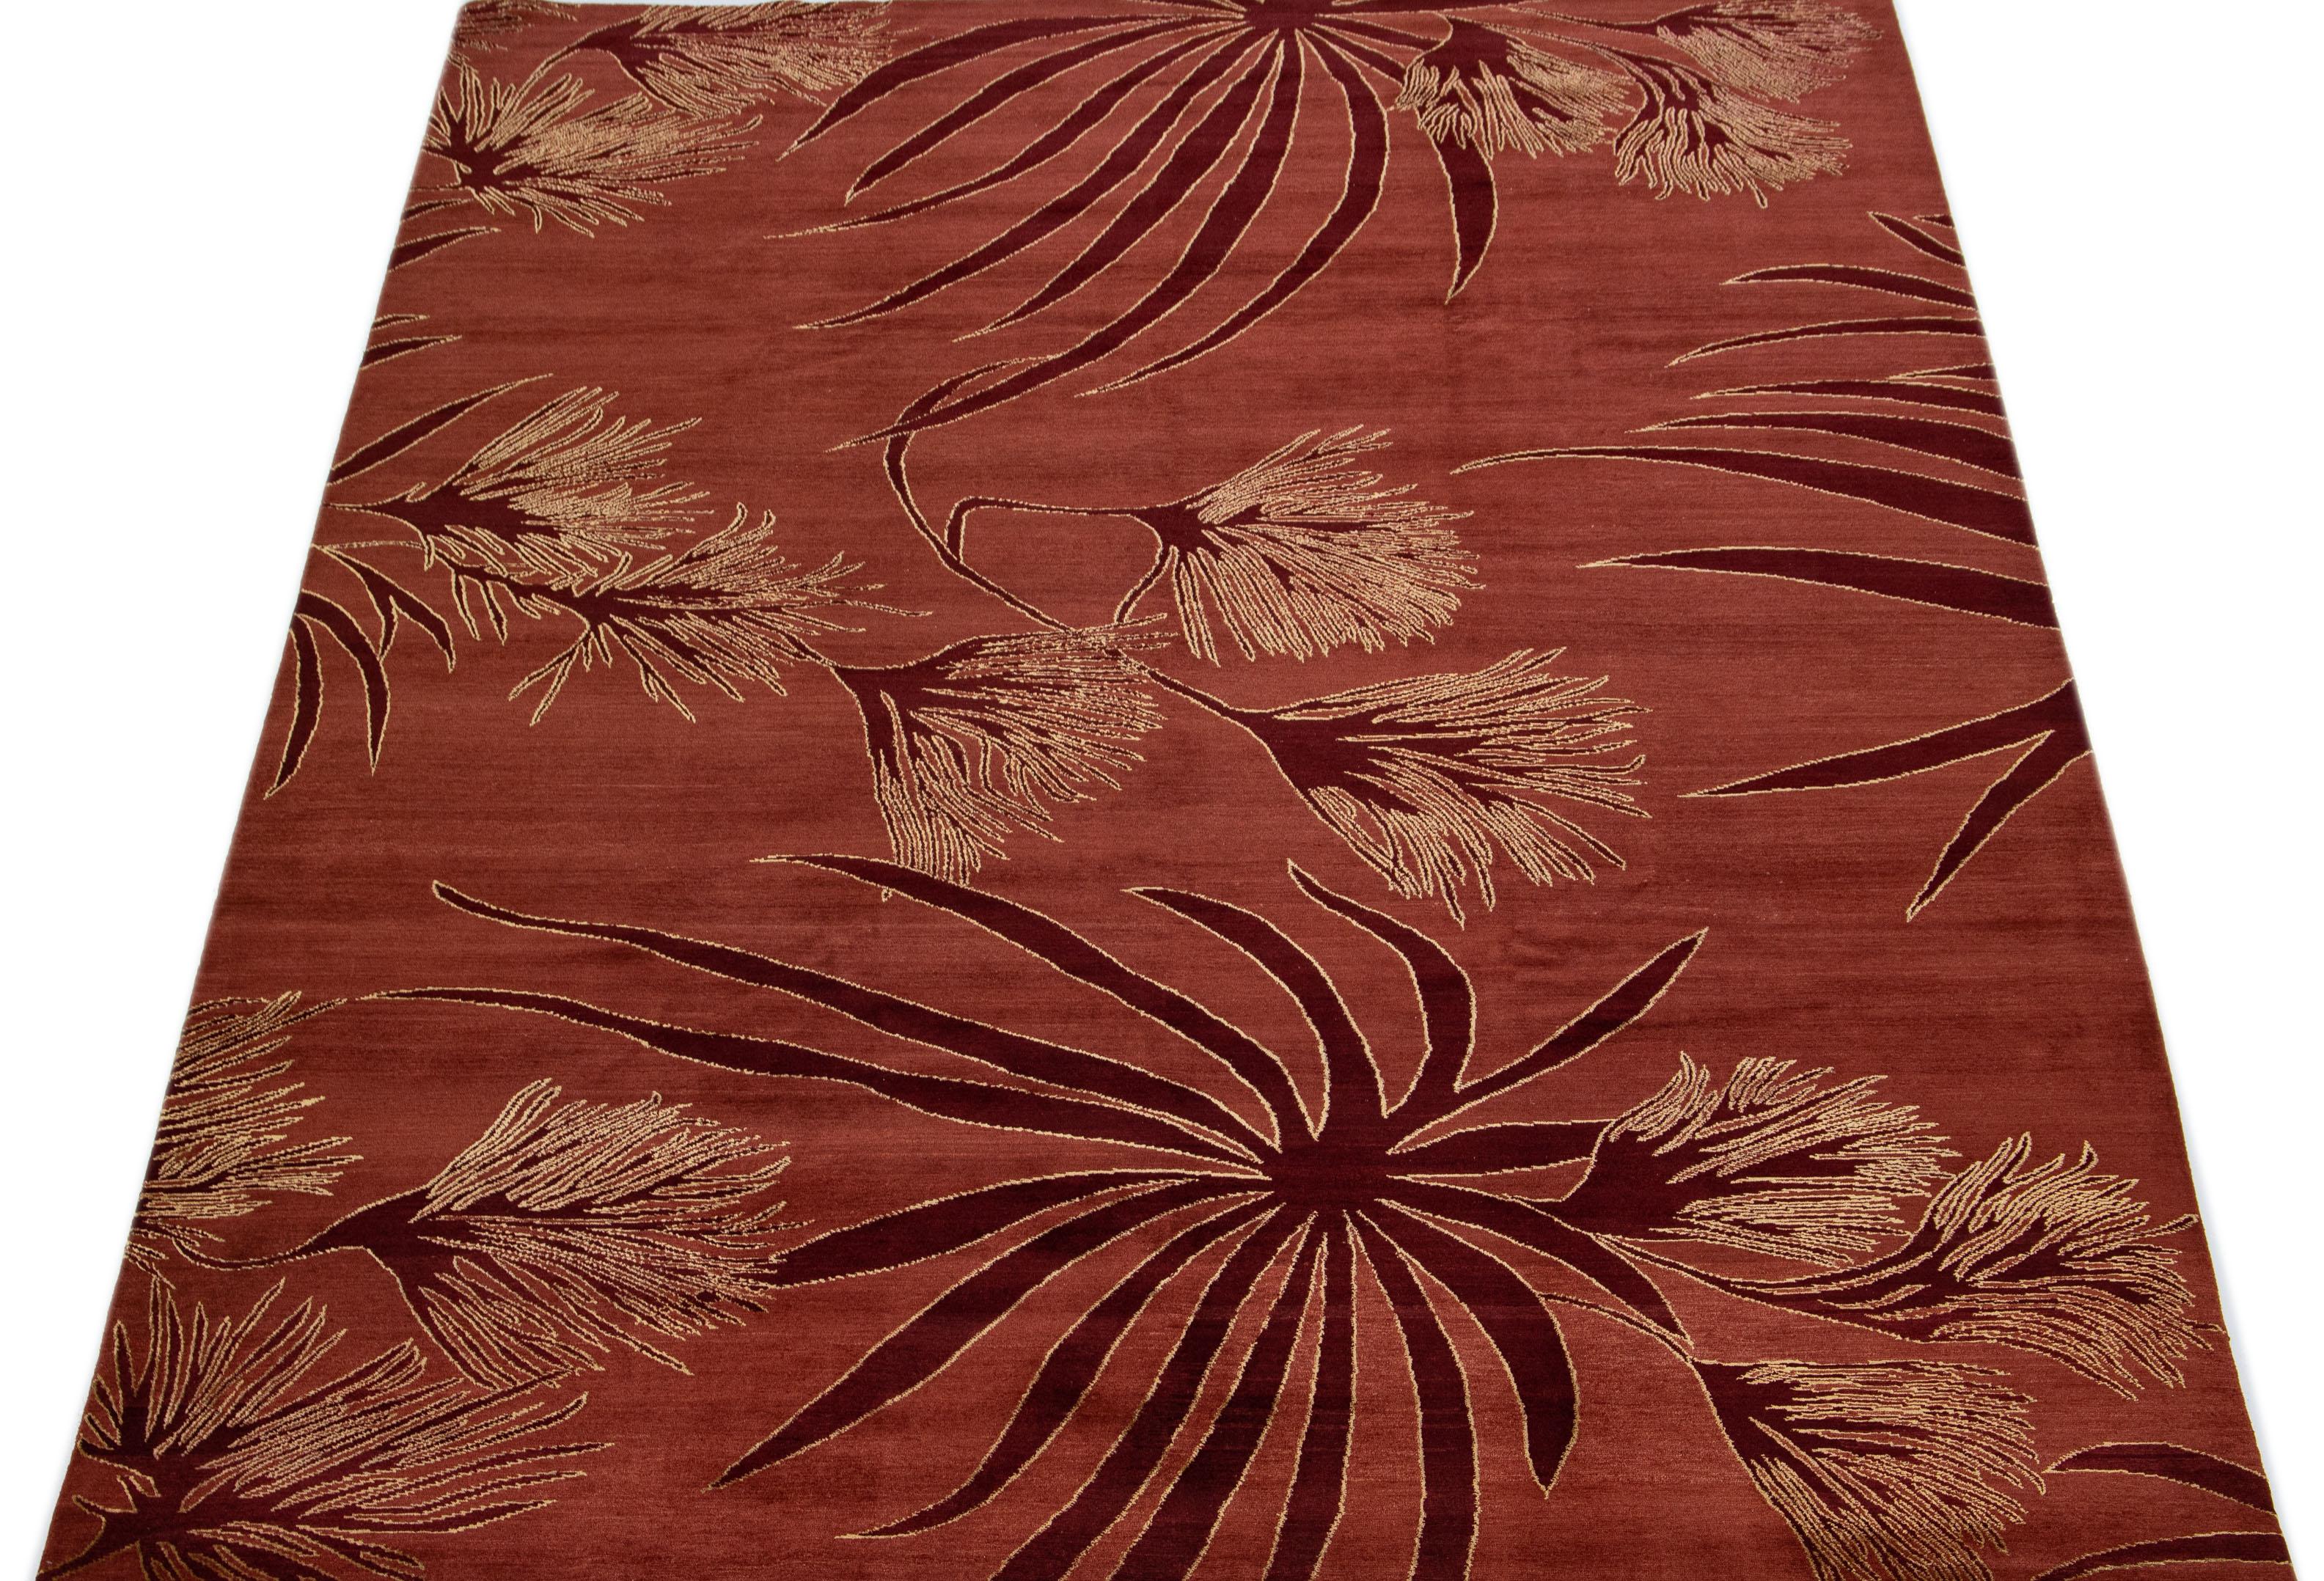 Beautiful modern Tibetan hand knotted wool and silk rug with a maroon color field. This Tibetan rug has tan and burgundy accents in a gorgeously floral pattern.

This rug measures 9' x 11'10